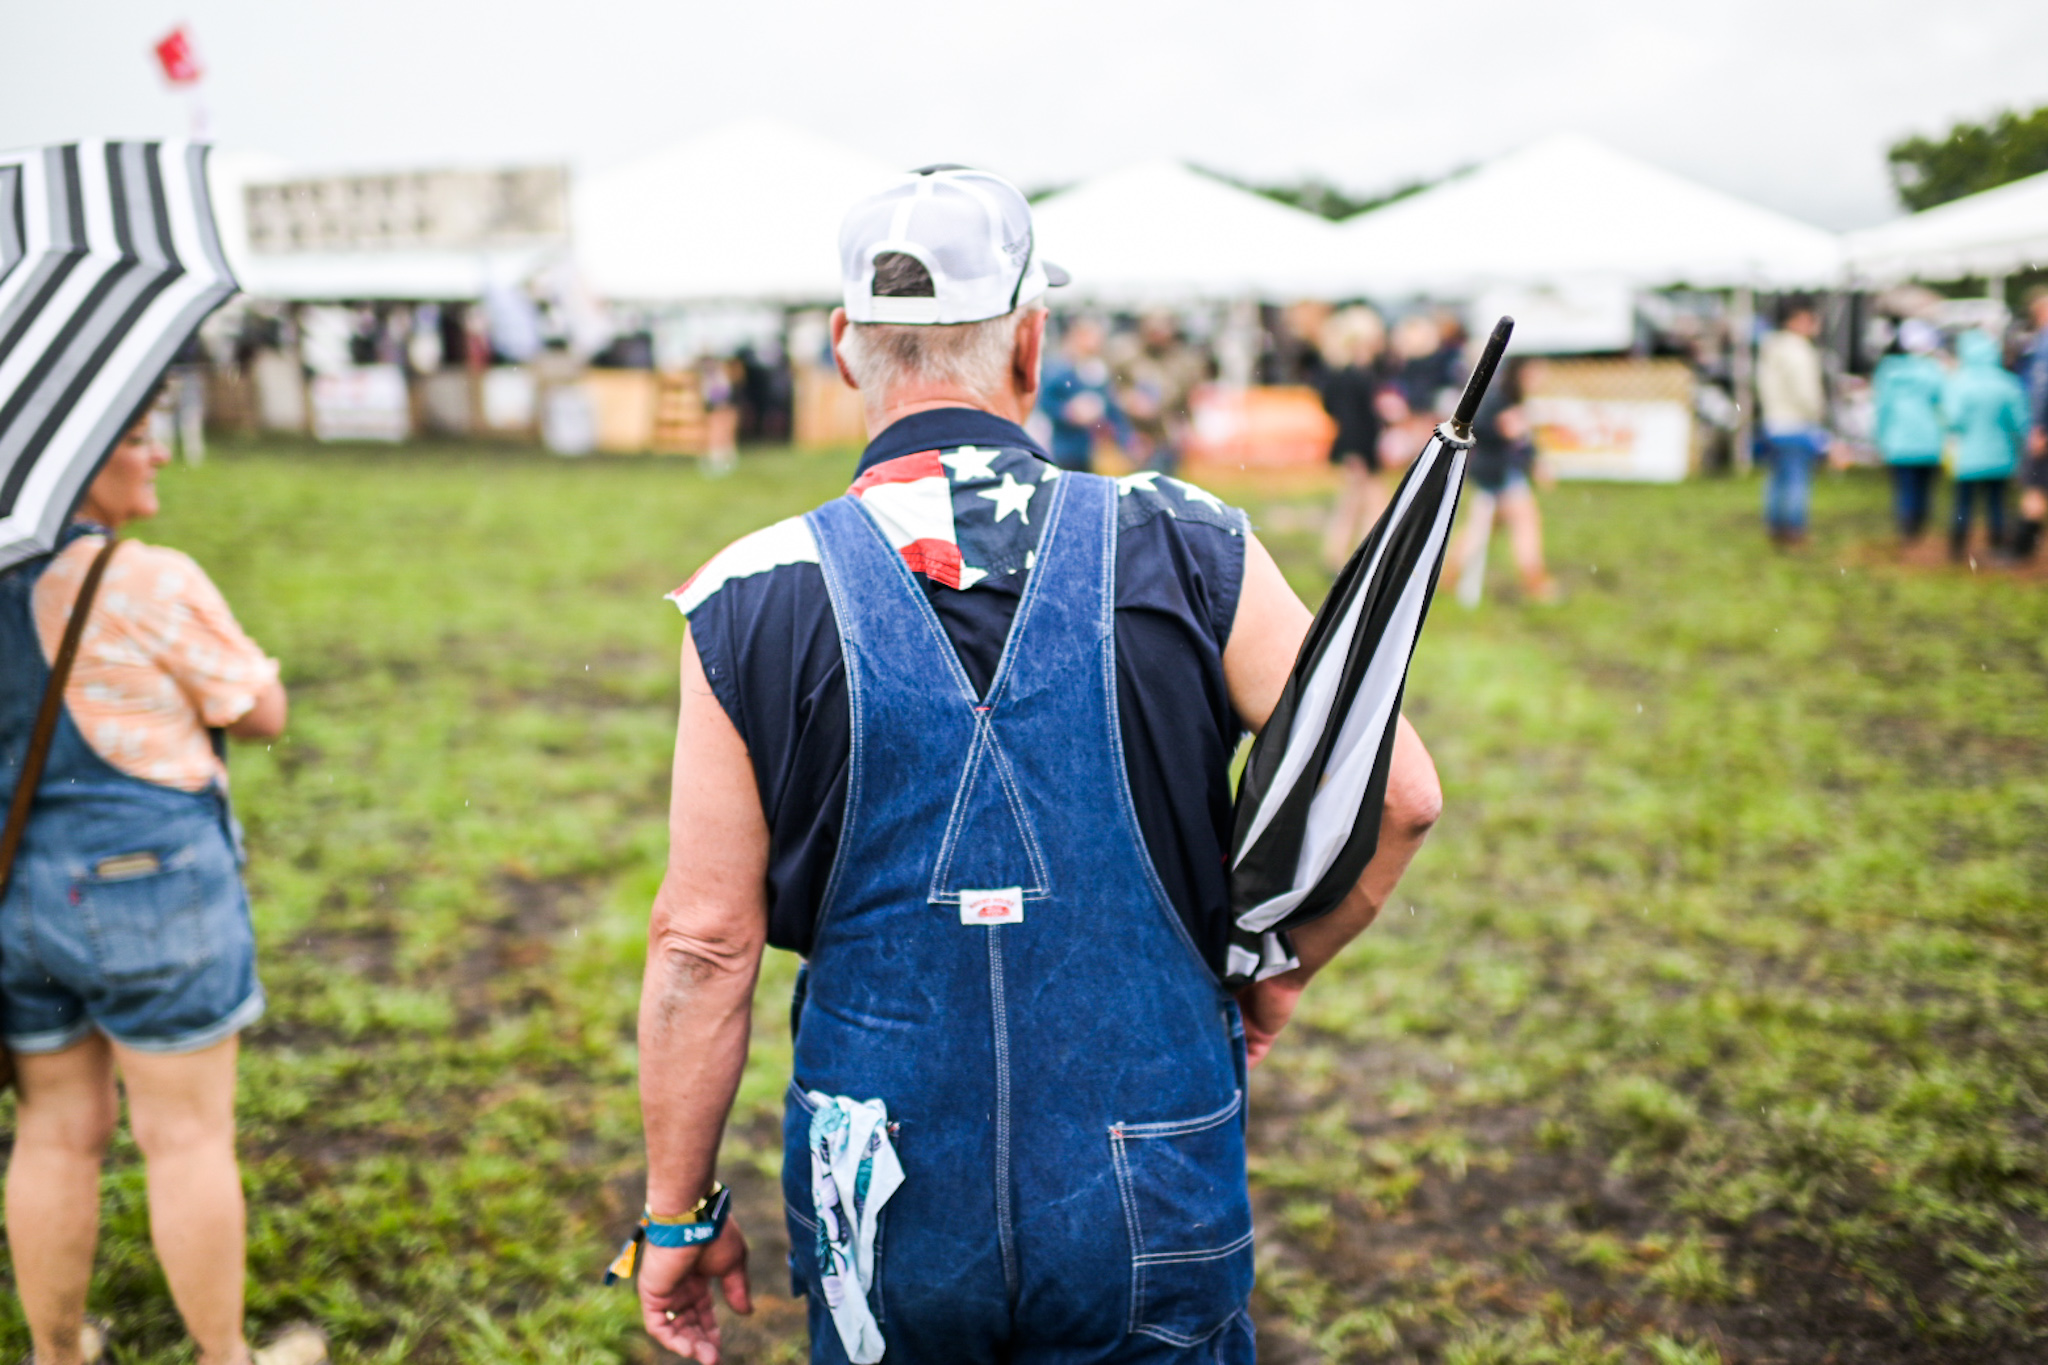 A festival-goer with an umbrella, dressed in overalls and Americana